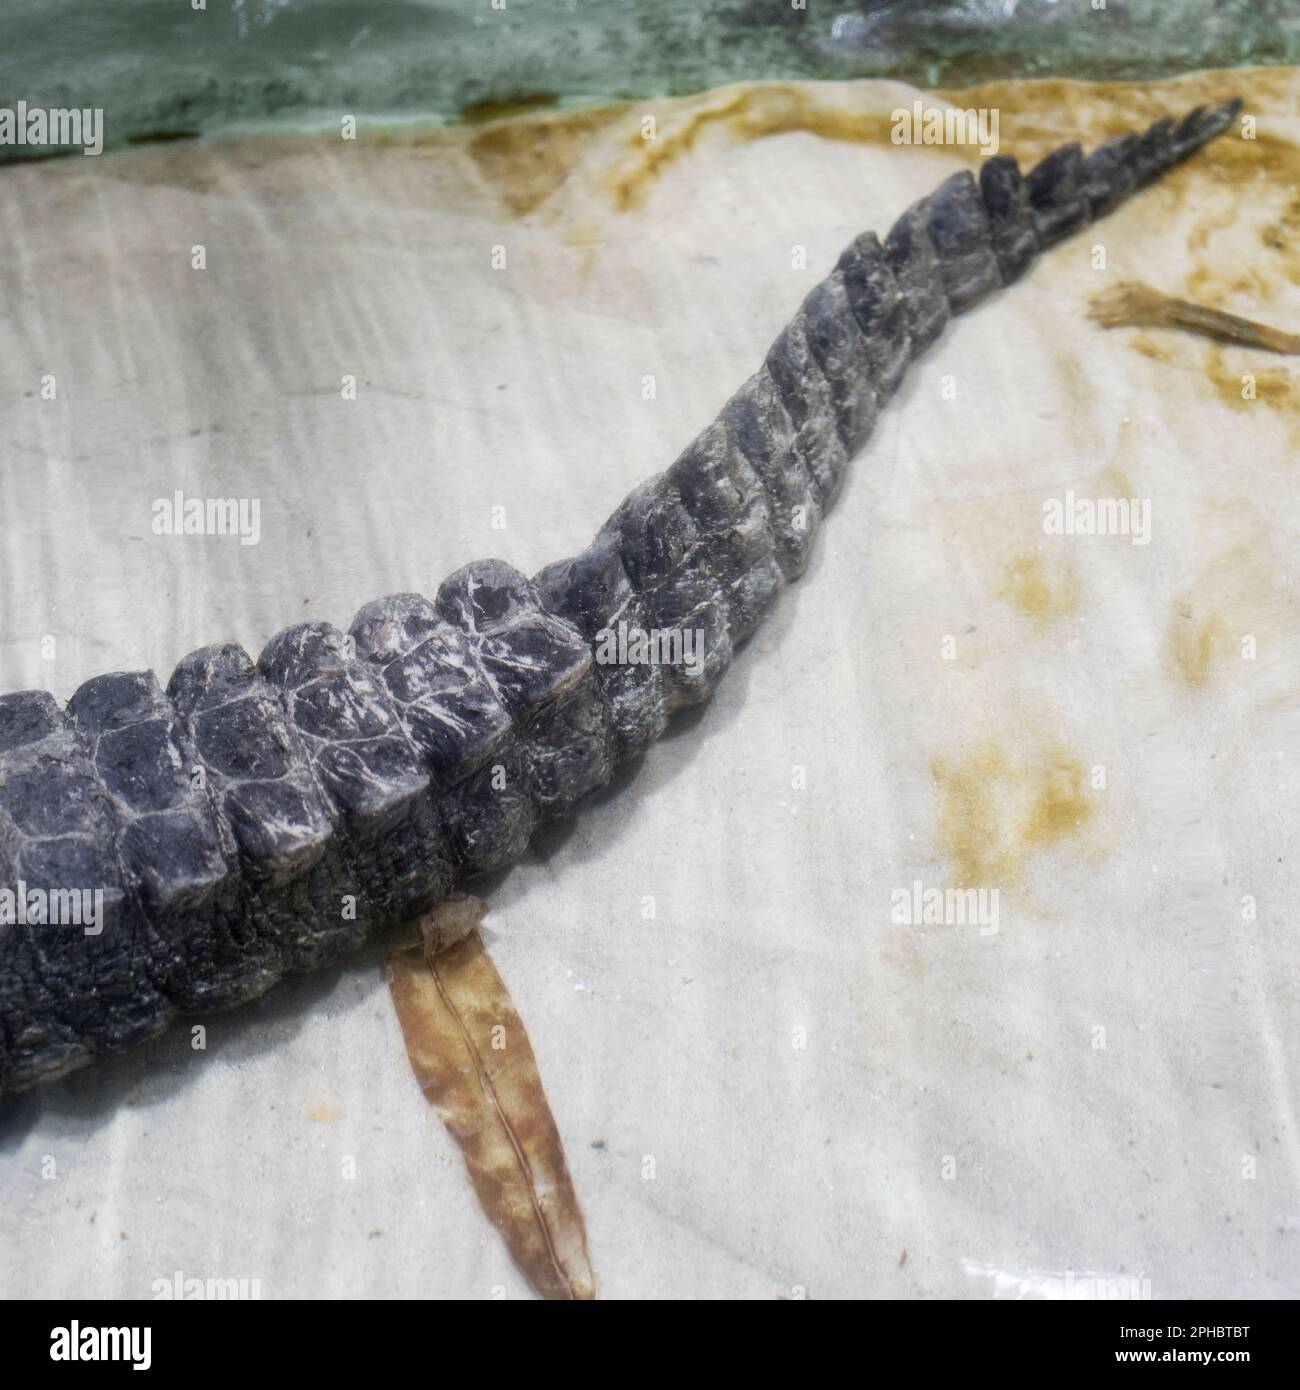 A detail of a dwarf crocodile's tail as it rests at the biopark Stock Photo